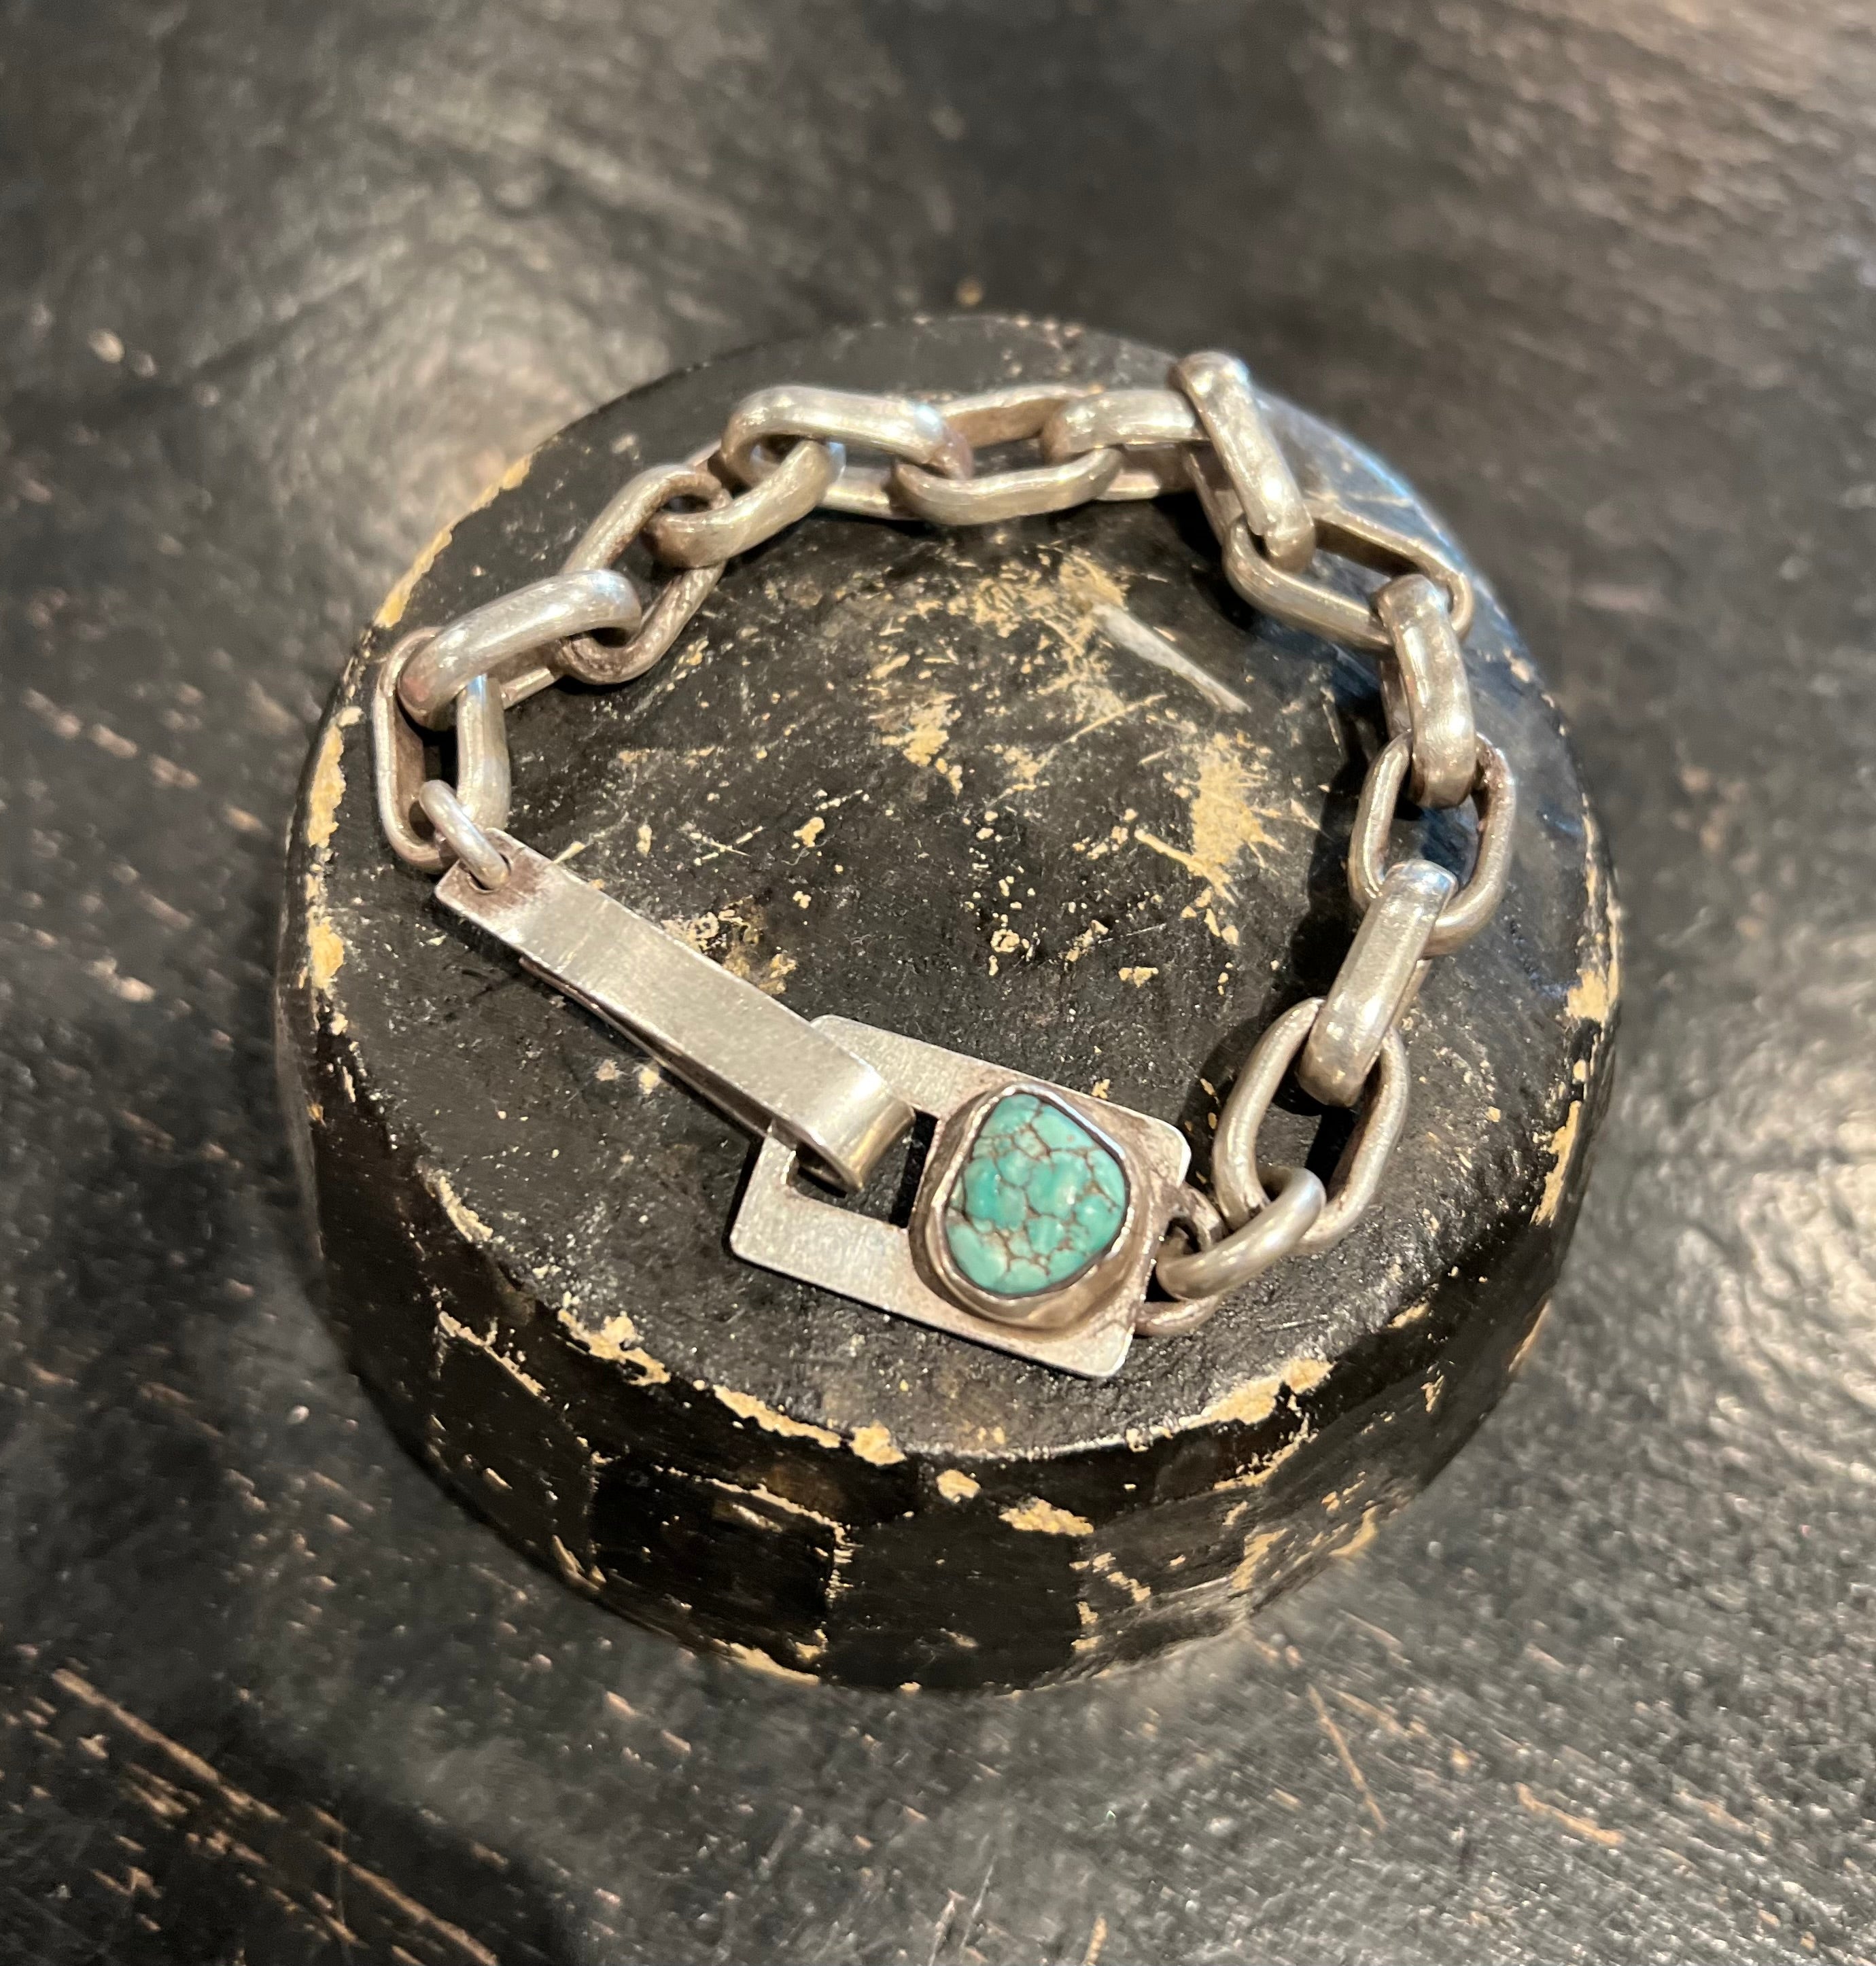 One of Kind Handmade Sterling and Turquoise Bracelet